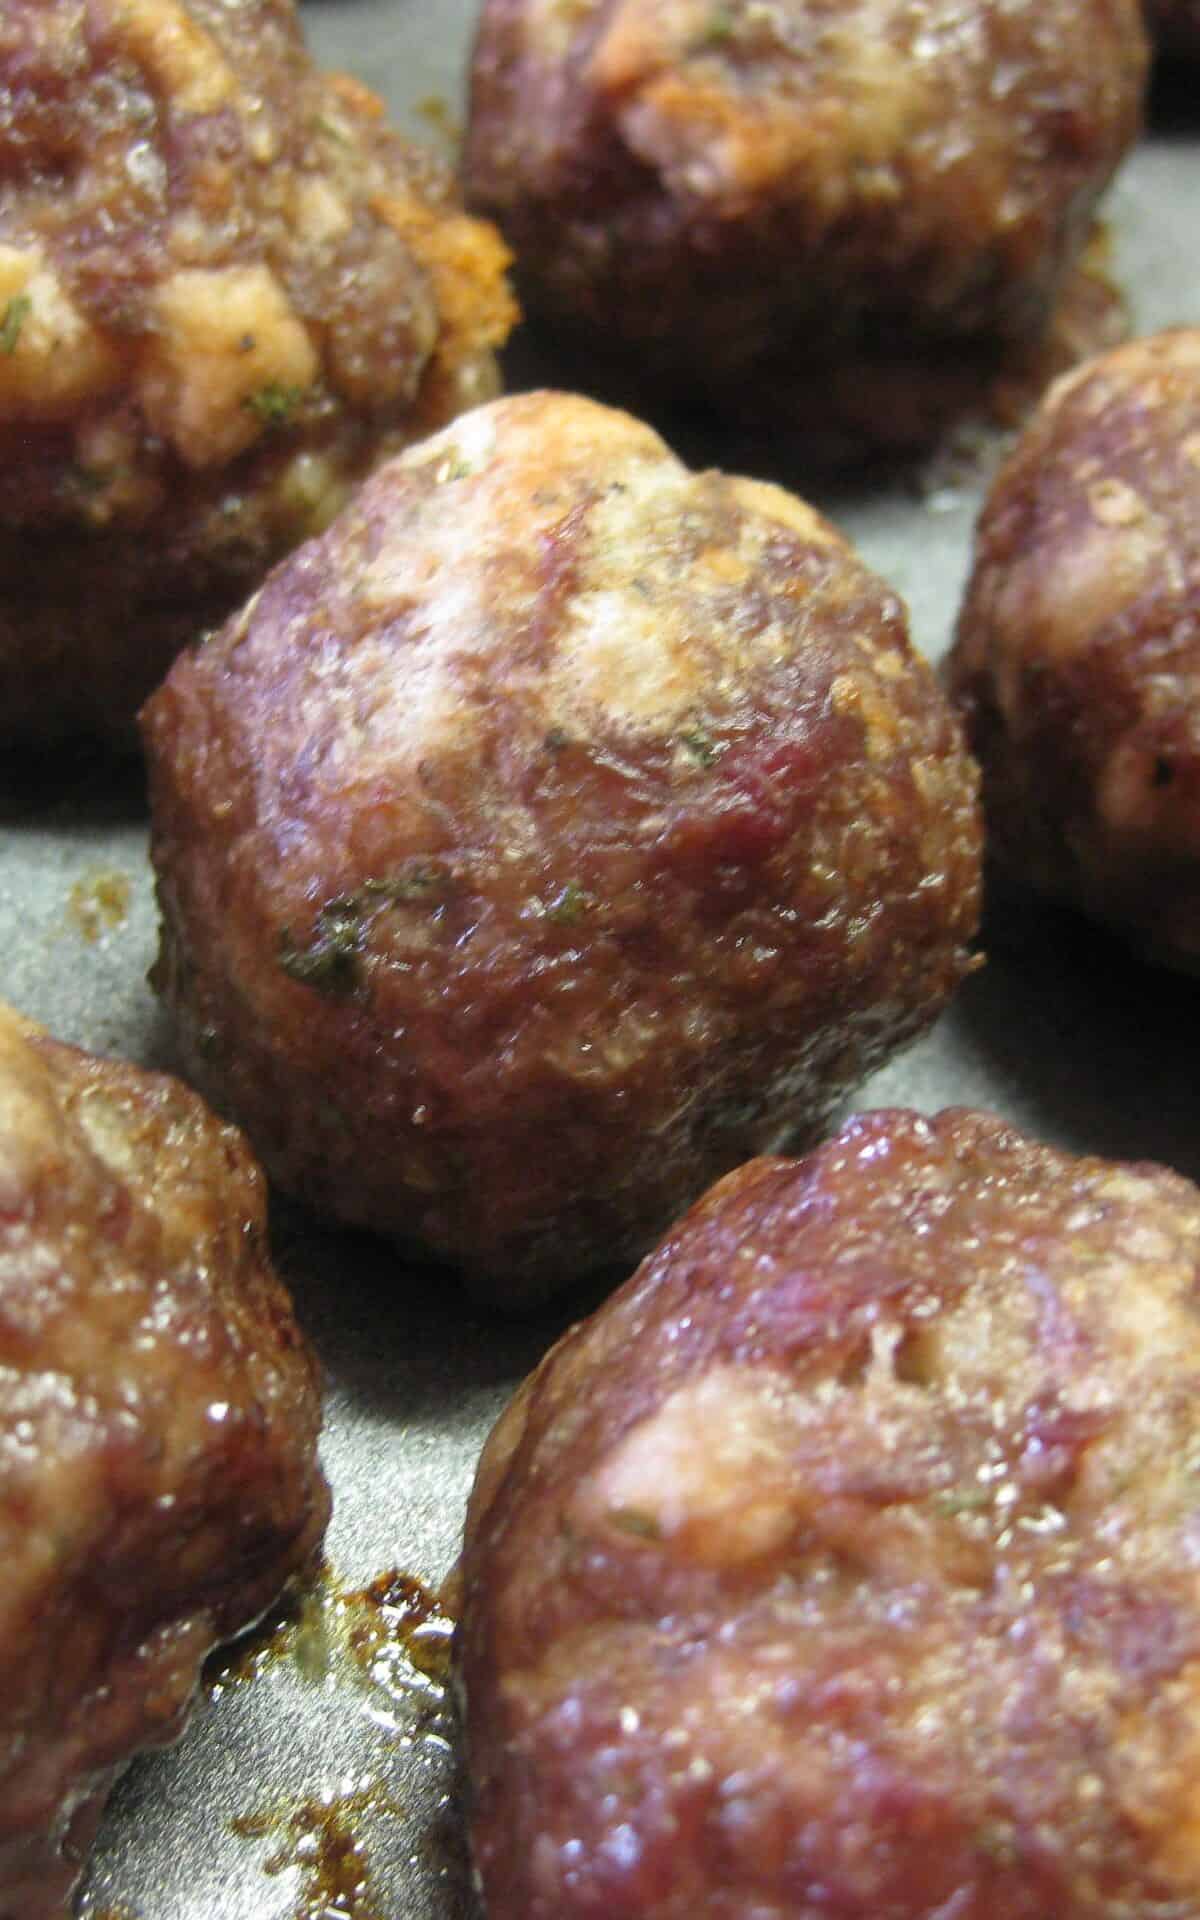  These meatballs are a sure-fire way to win over any meat lover's heart (and taste buds).